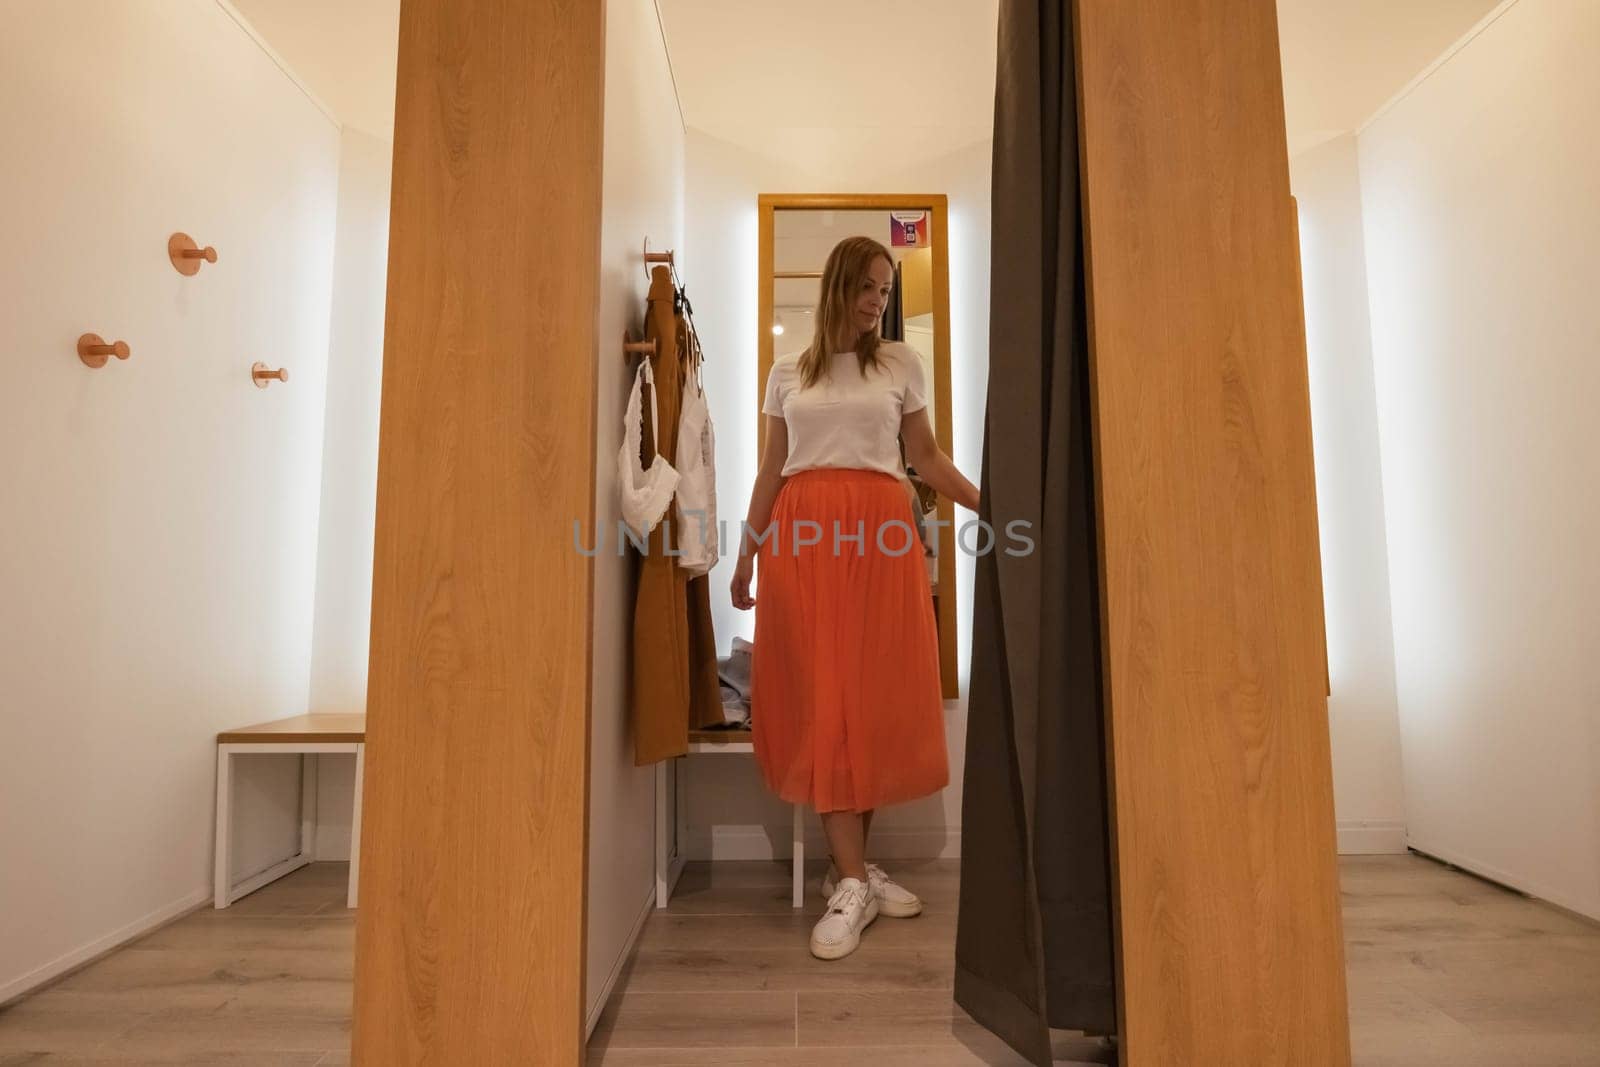 a girl trying on a white t-shirt and an orange skirt in a booth looks in the mirror. by PopOff